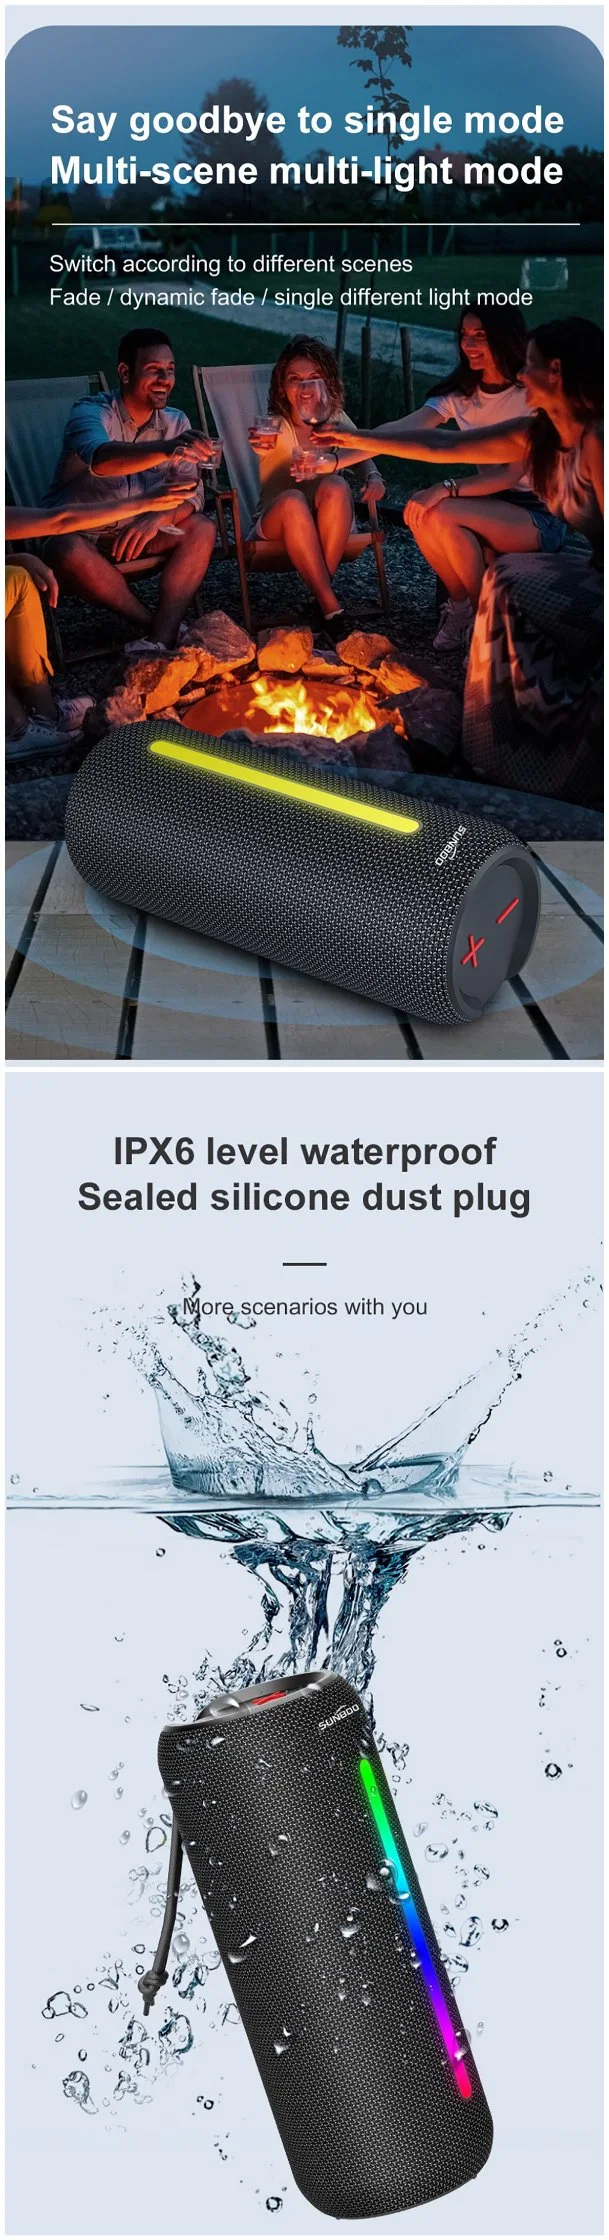 Waterproof Bluetooth Speakers Outdoor Wireless Portable Speaker for Camping Beach Sports with LED Light